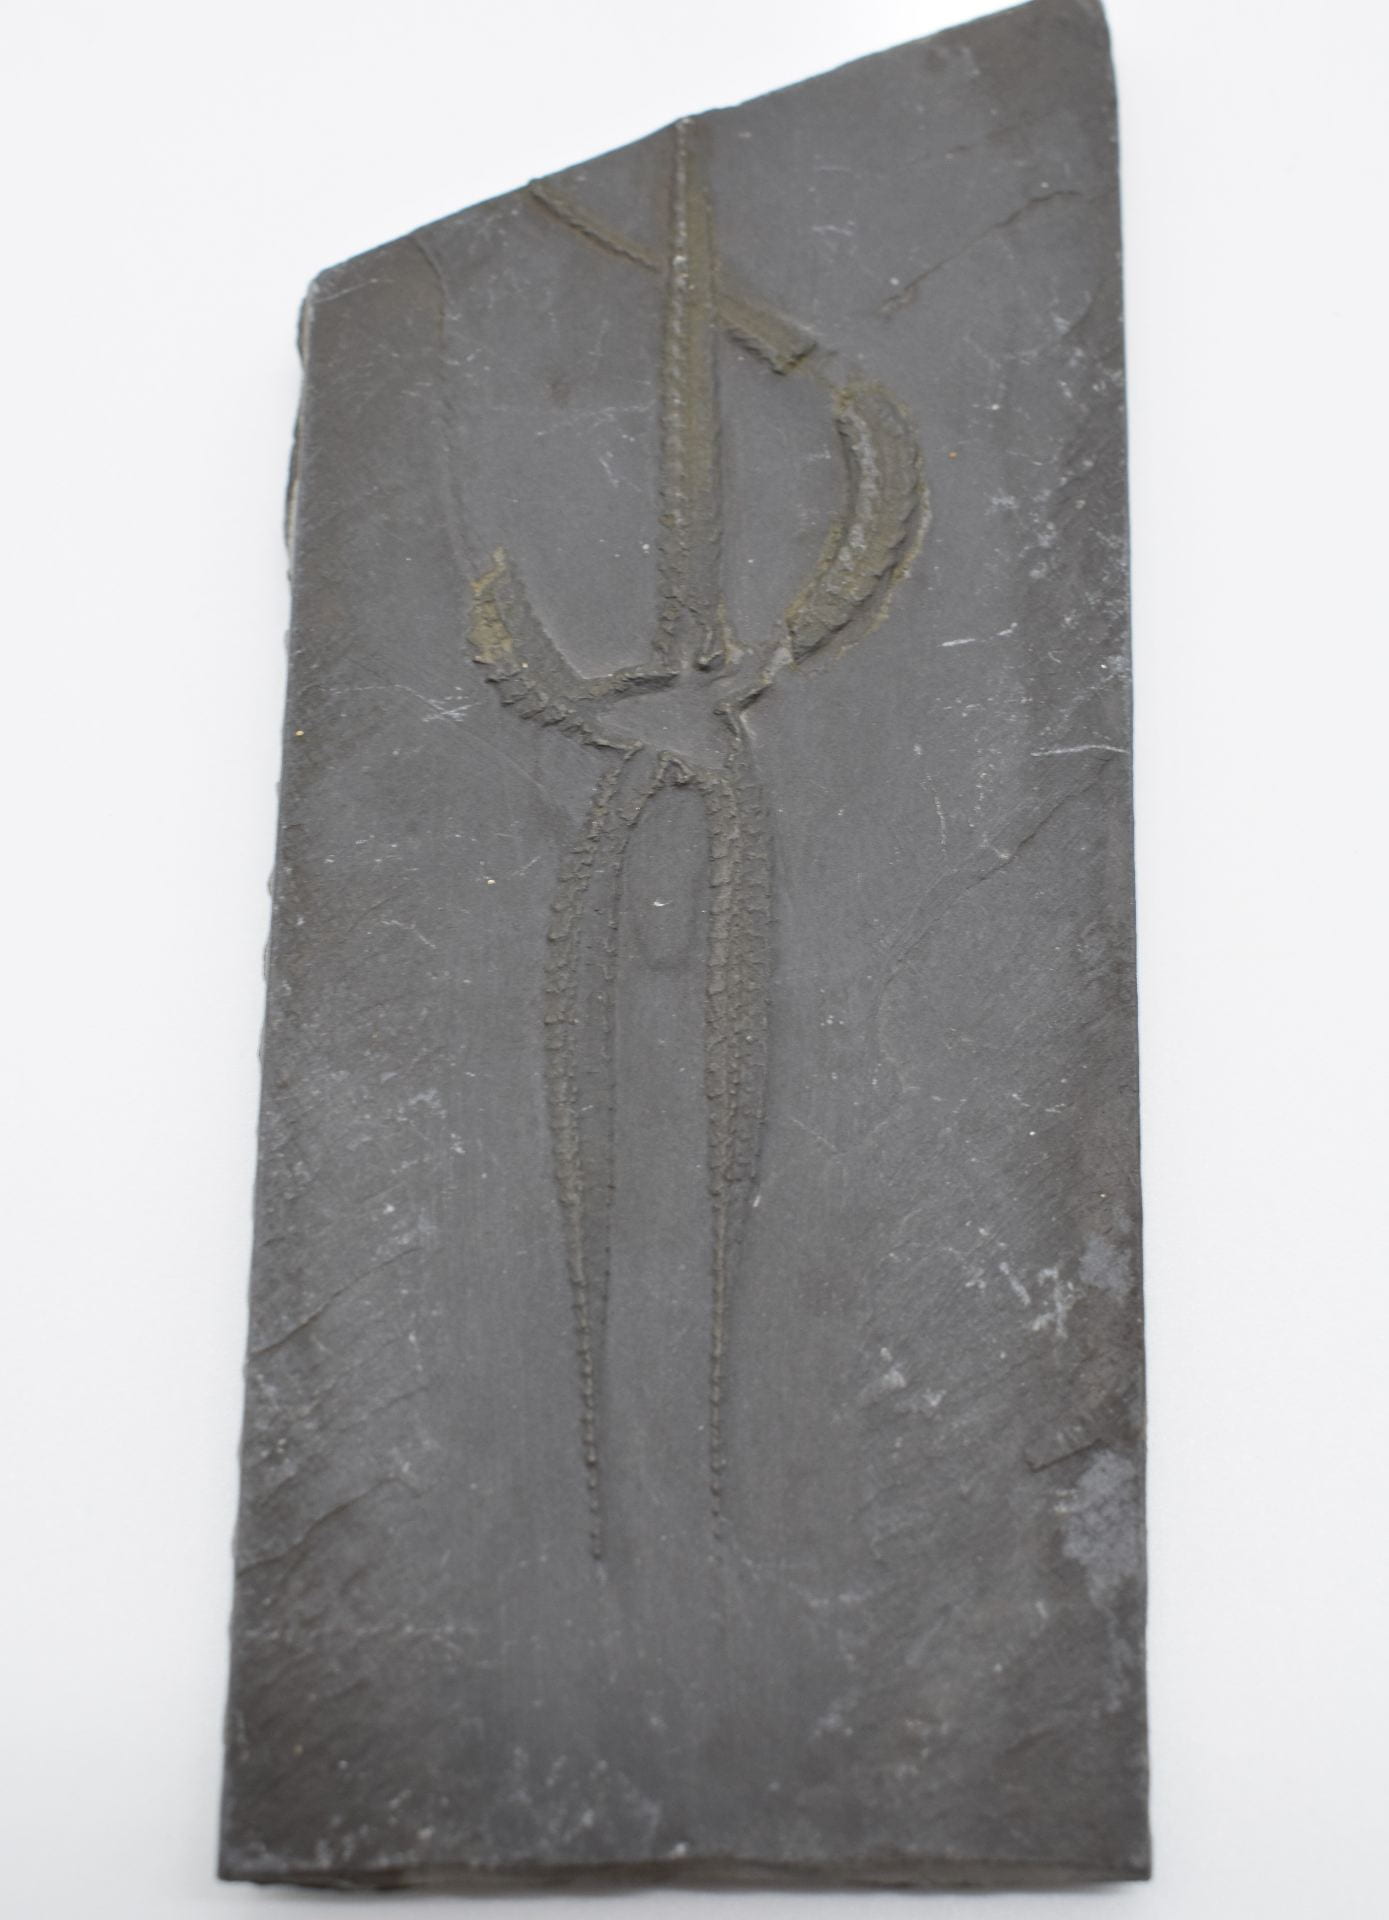 A gray rectangular slab of flat rock with the shape of a starfish on it - a center with five appendages radiating out from it.